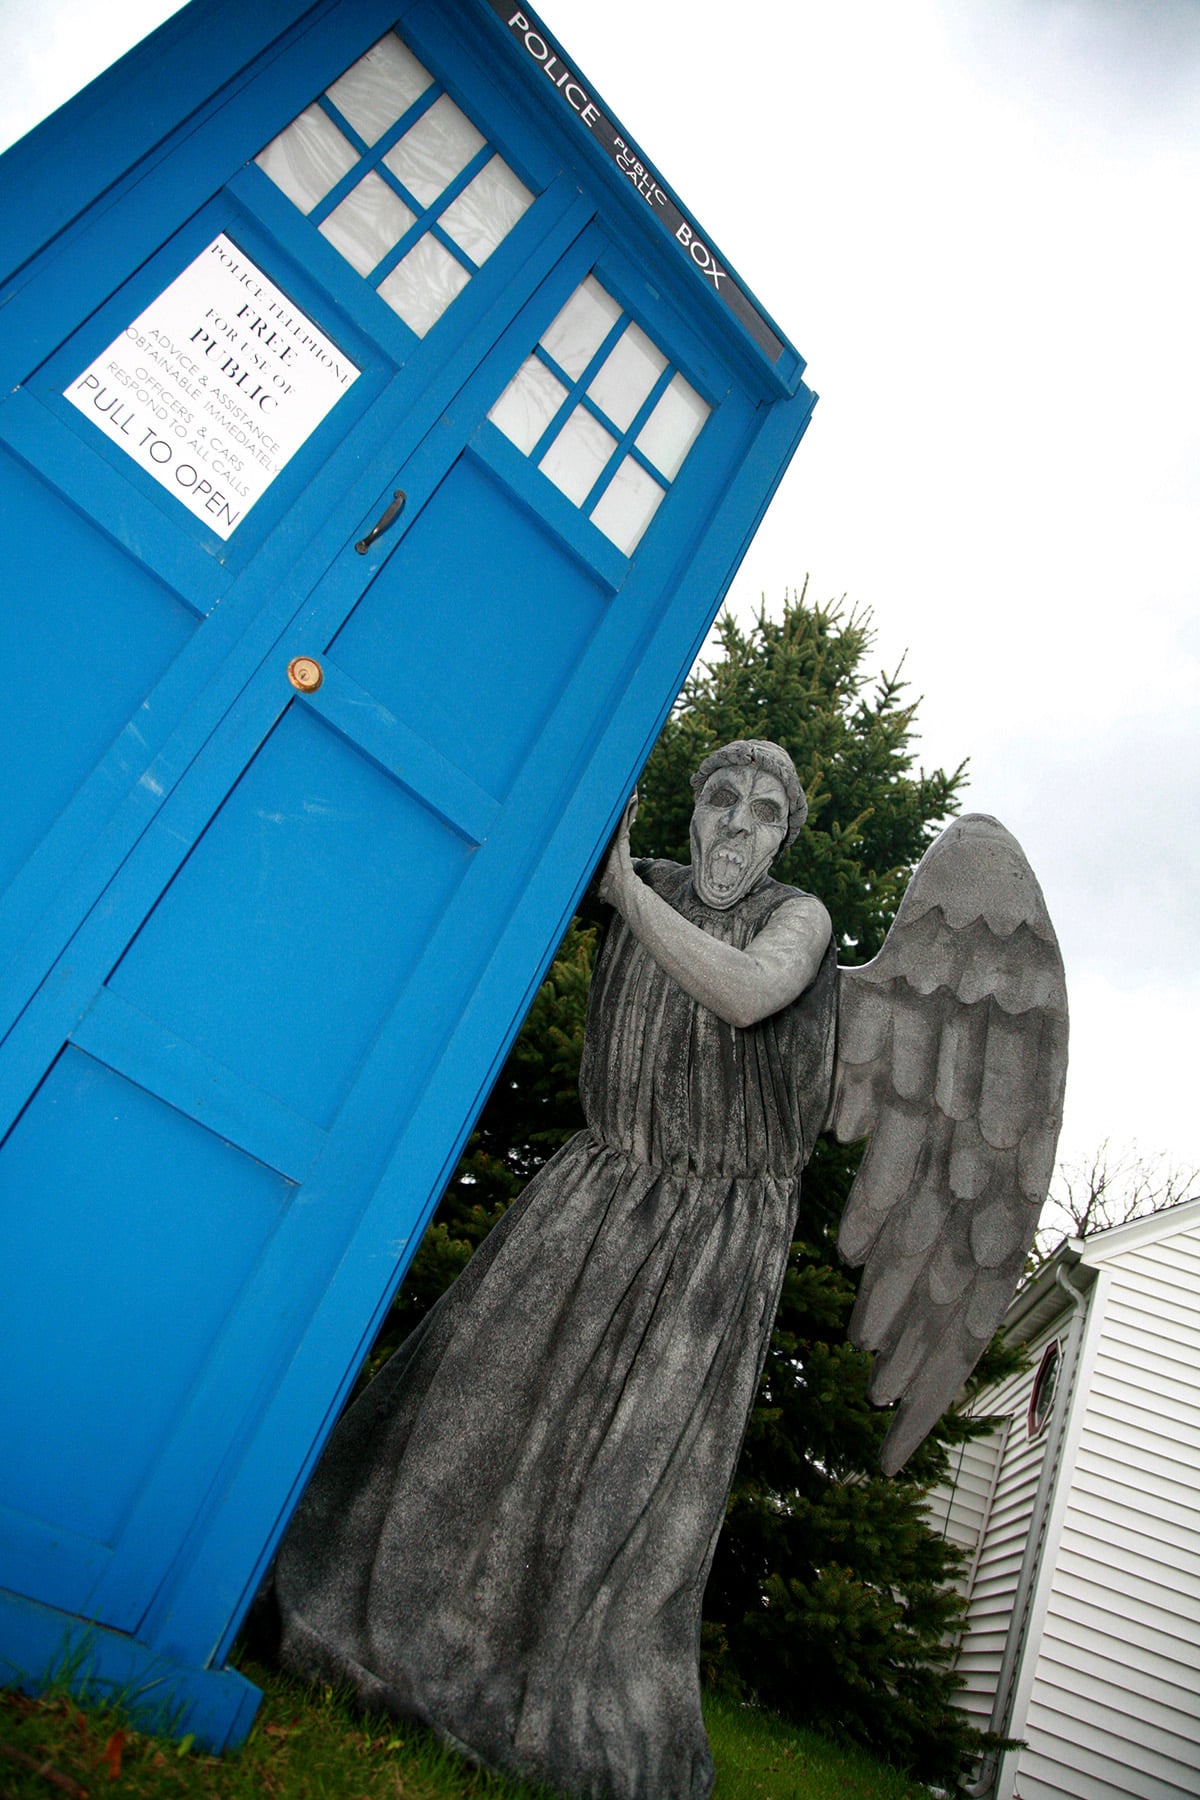 A person dressed as a weeping angel, leaning on a full sized TARDIS.